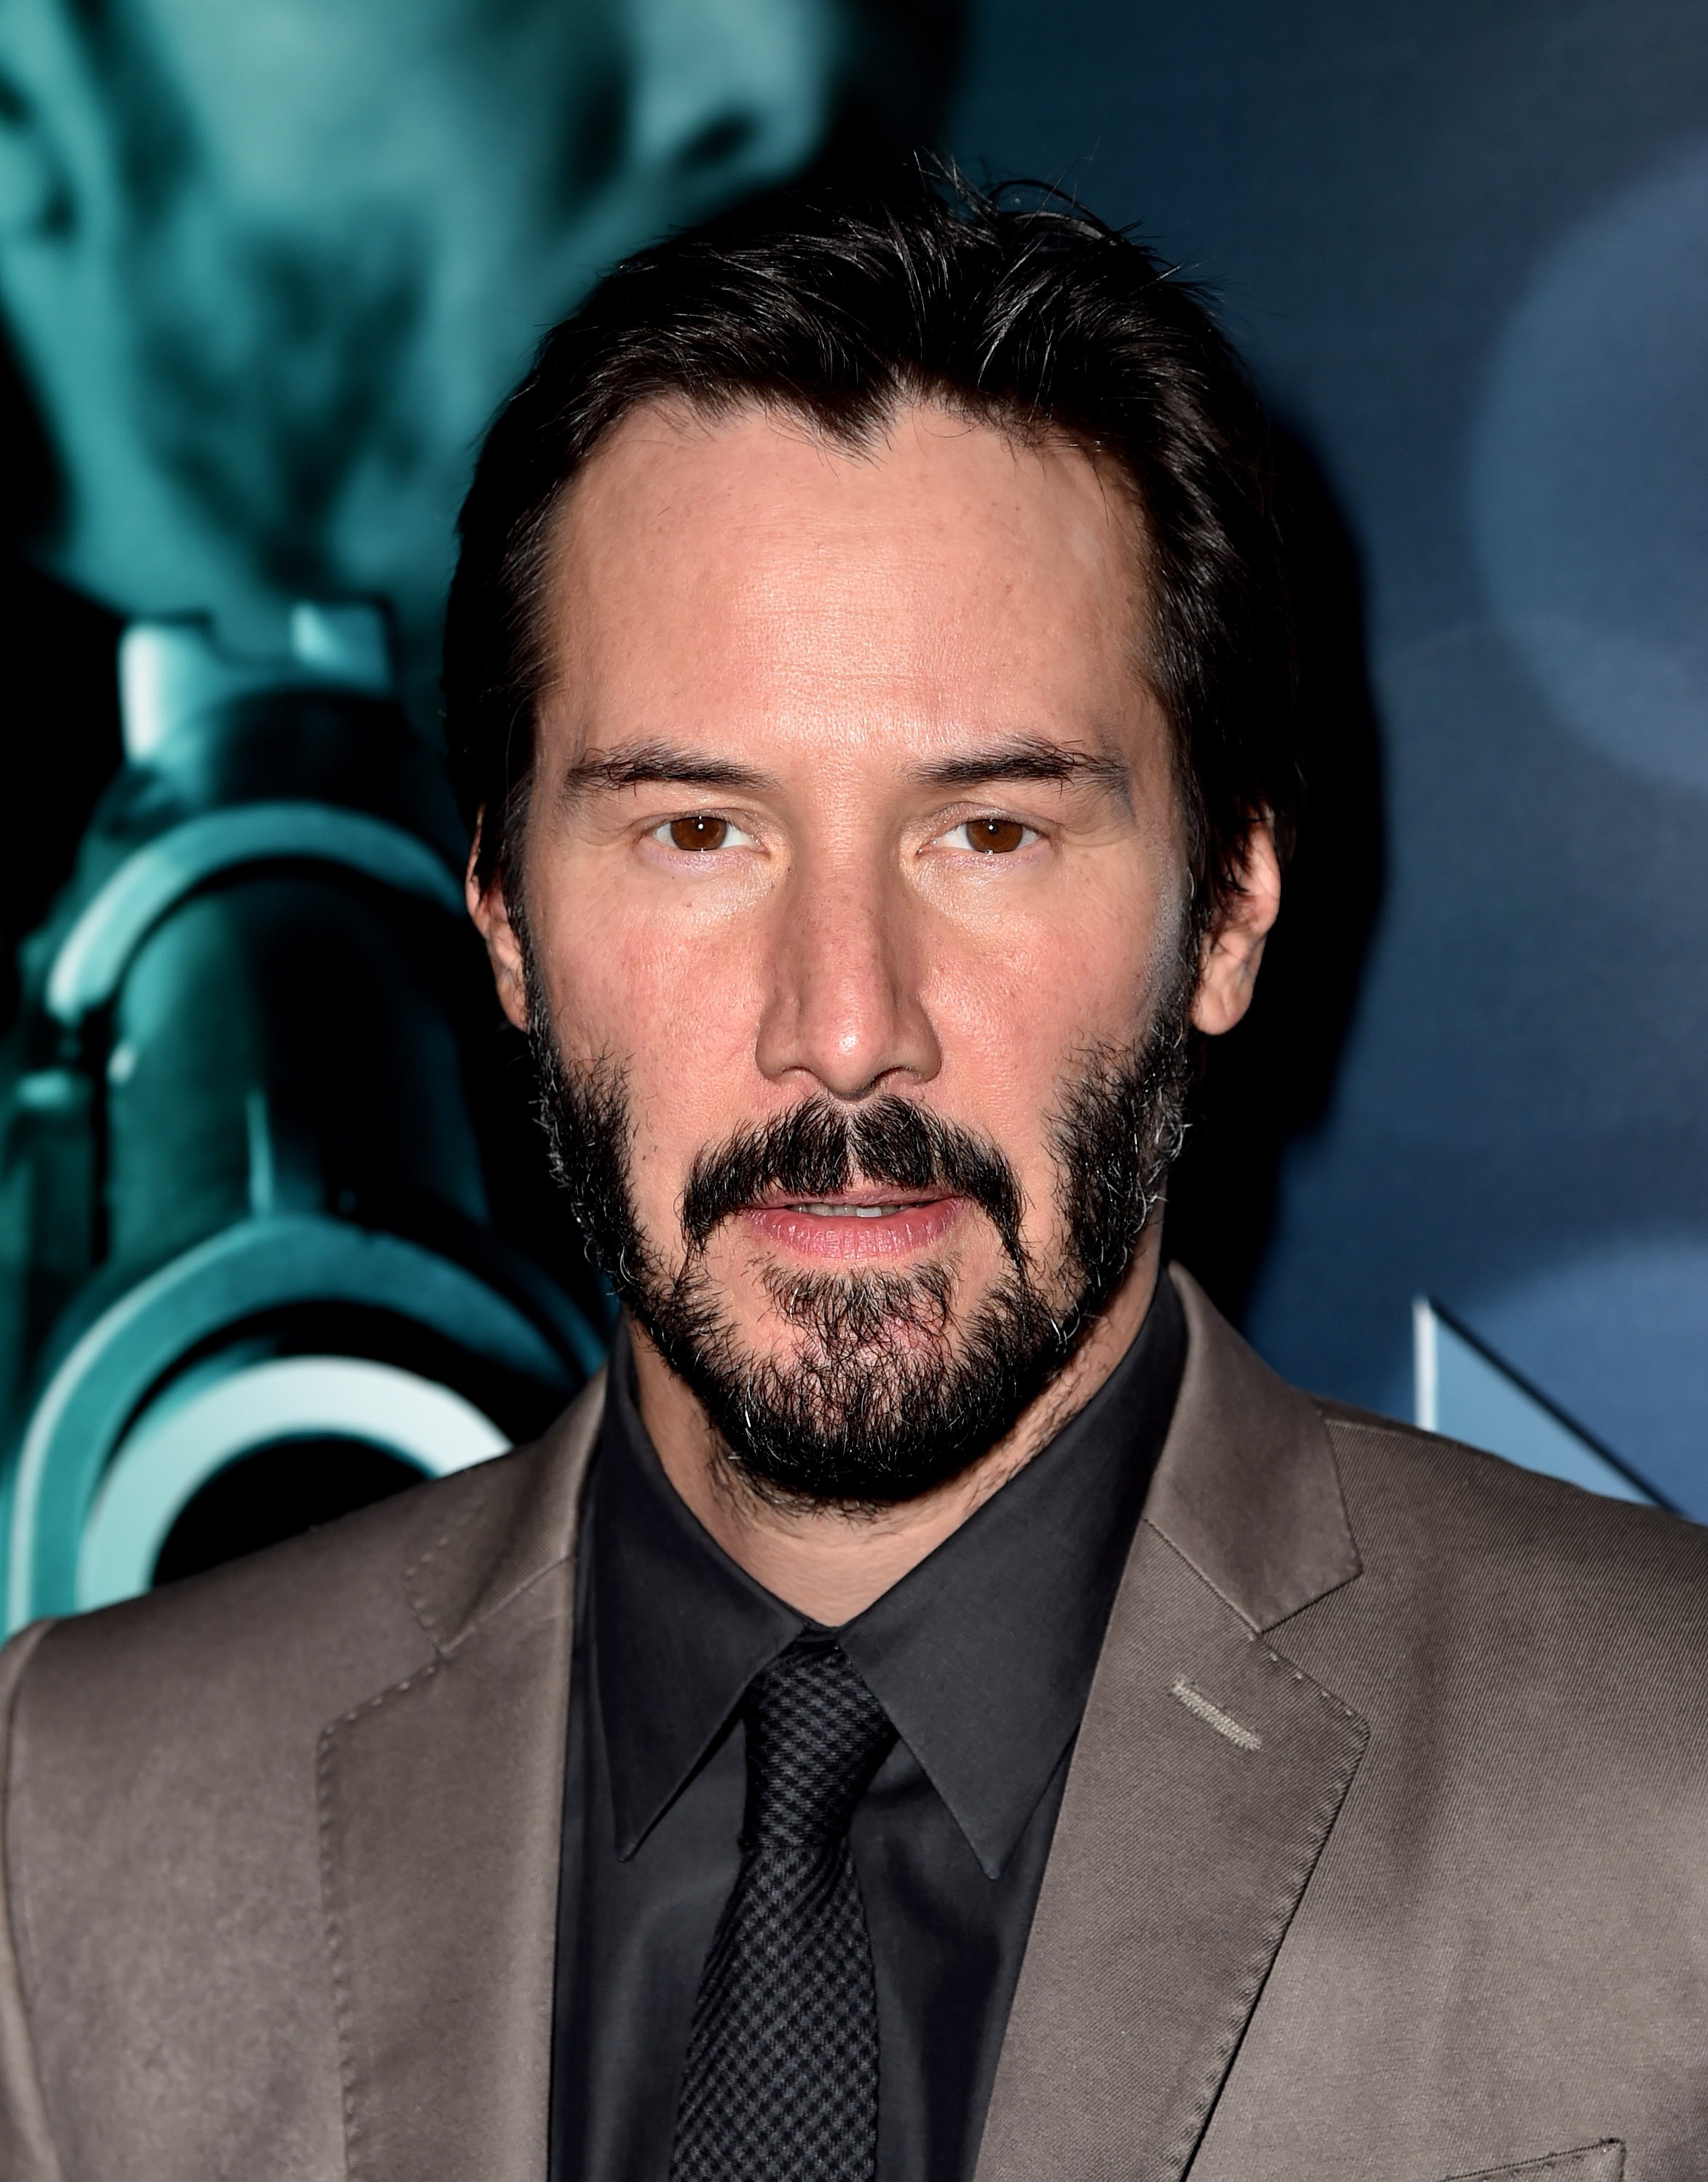 LOS ANGELES, CA - OCTOBER 22:  Actor Keanu Reeves arrives at a screening of Lionsgate Films' "John Wick" at the Arclight Theatre on October 22, 2014 in Los Angeles, California.  (Photo by Kevin Winter/Getty Images) (Foto: Getty Images)